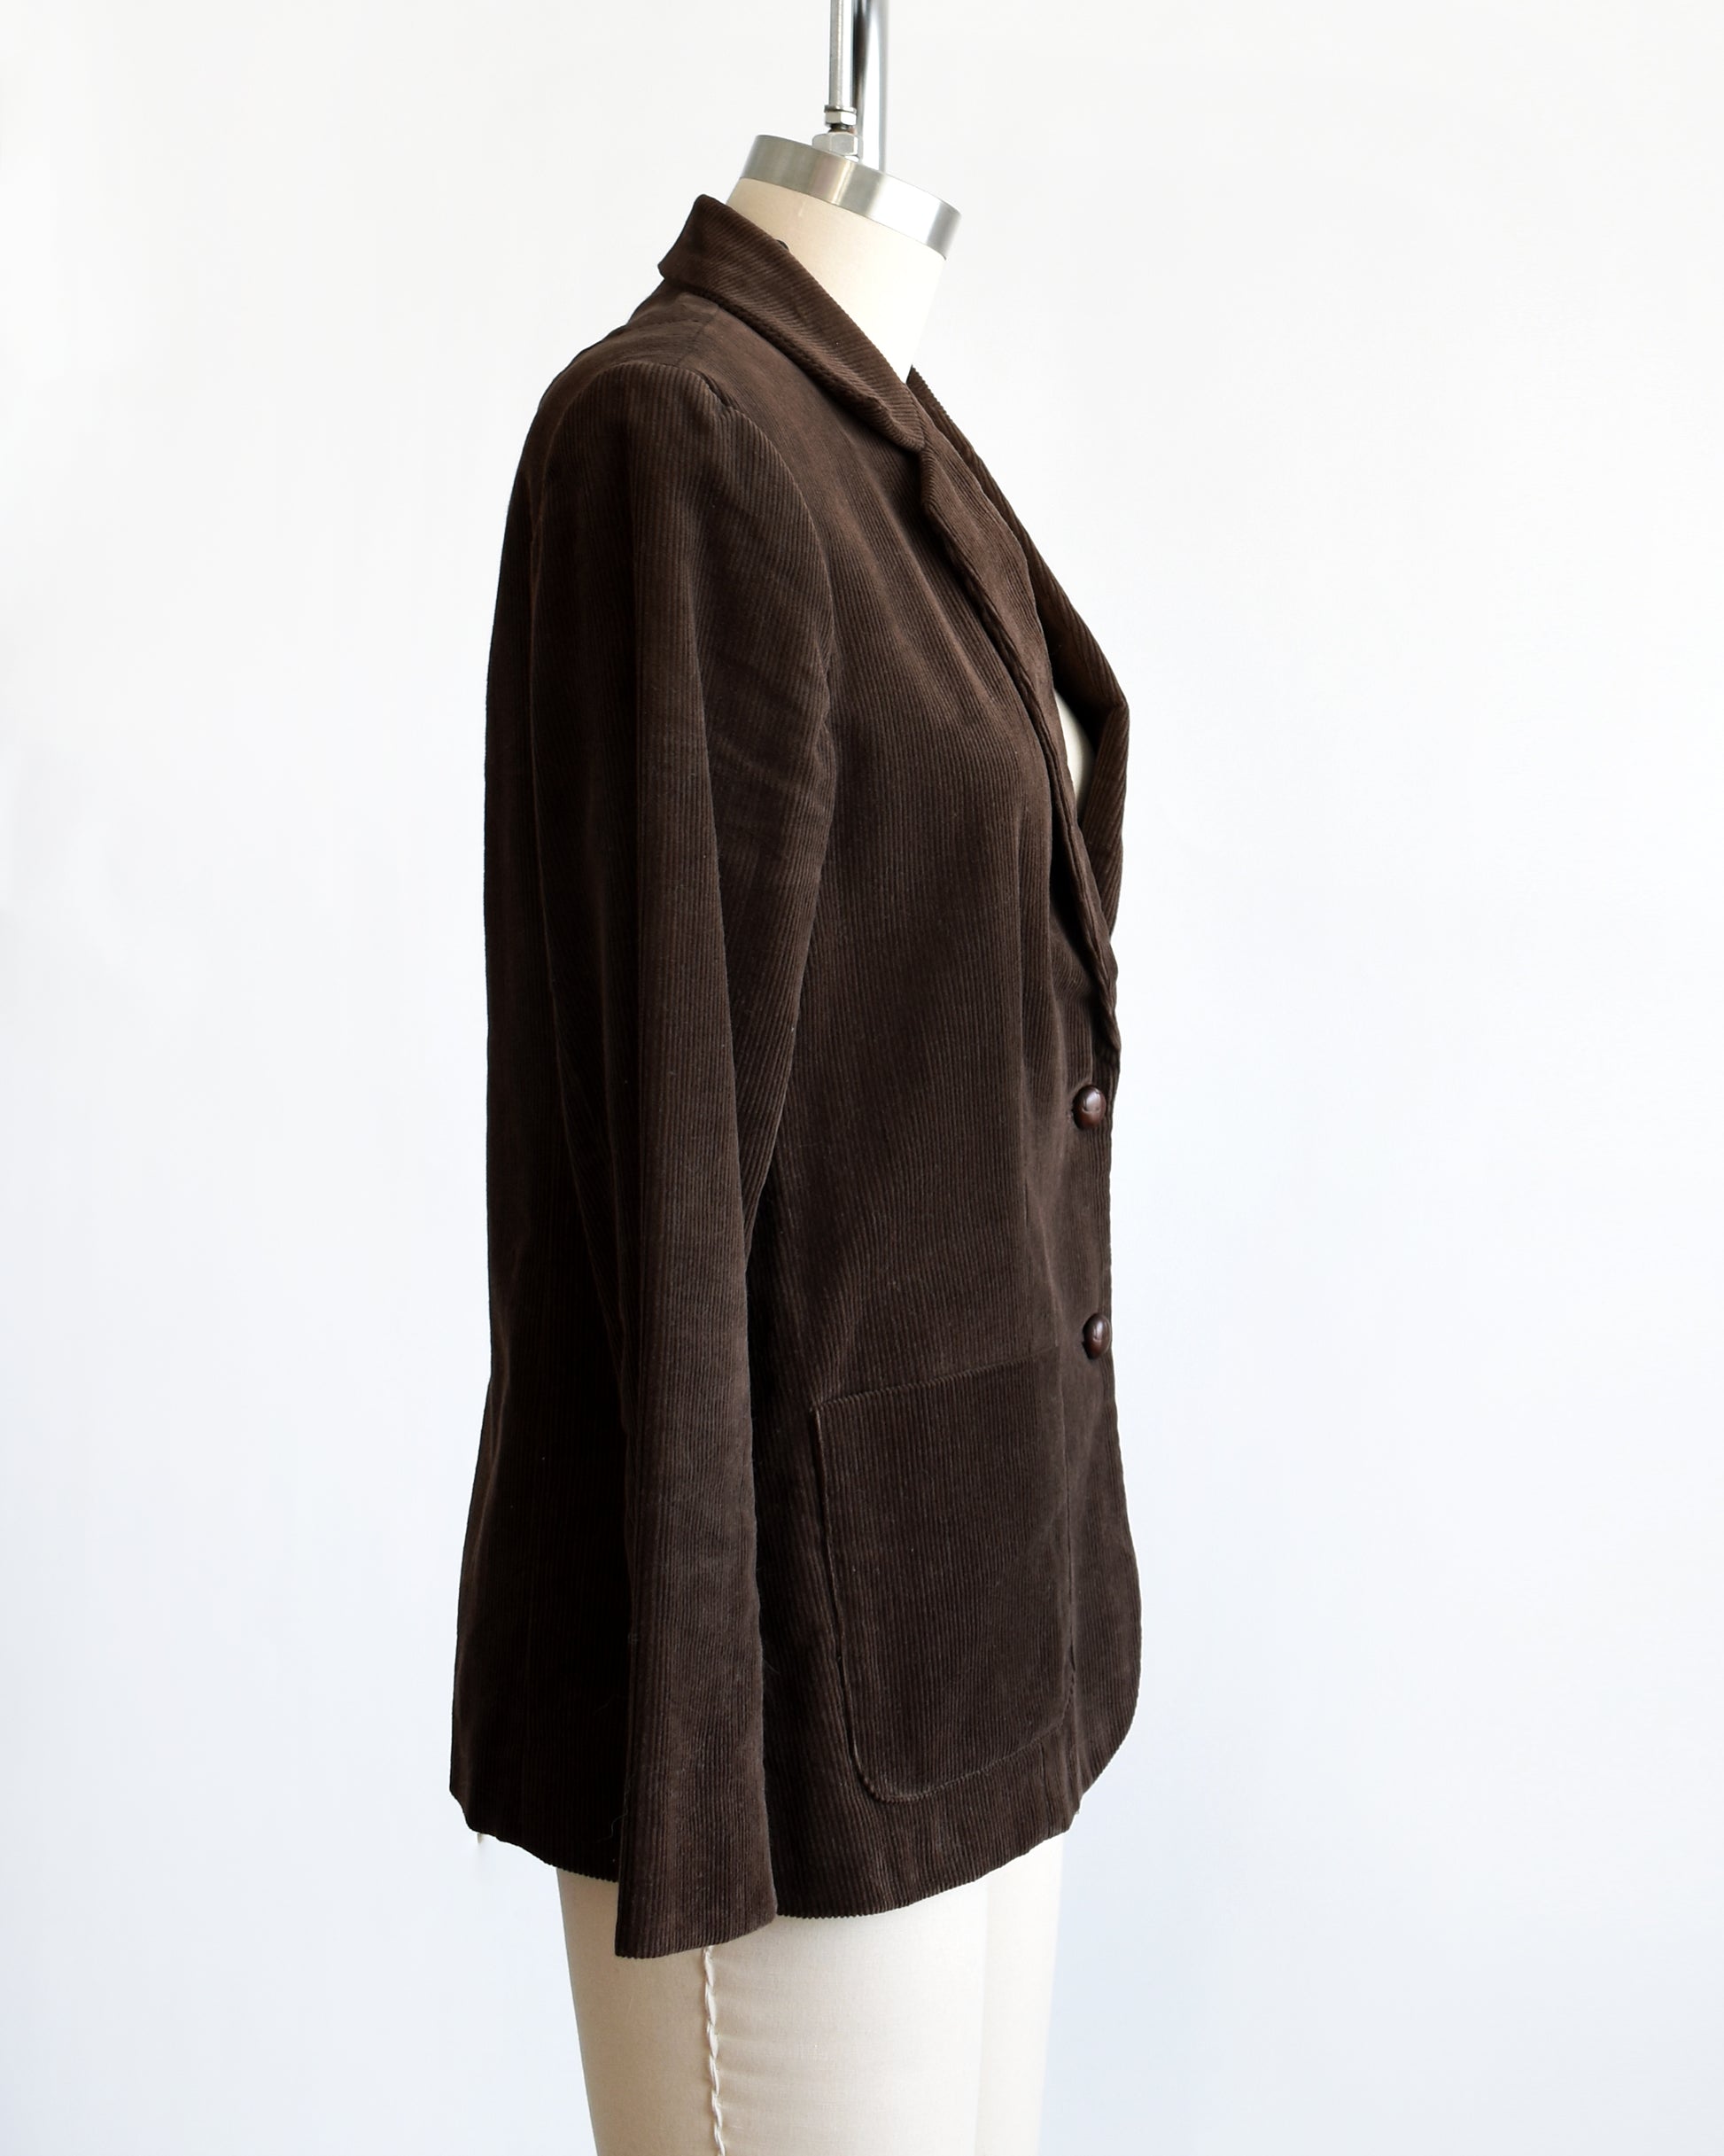 Side view of a vintage 1970s chocolate brown corduroy blazer features two faux wood plastic buttons on the front and two smaller matching buttons on the cuffs.